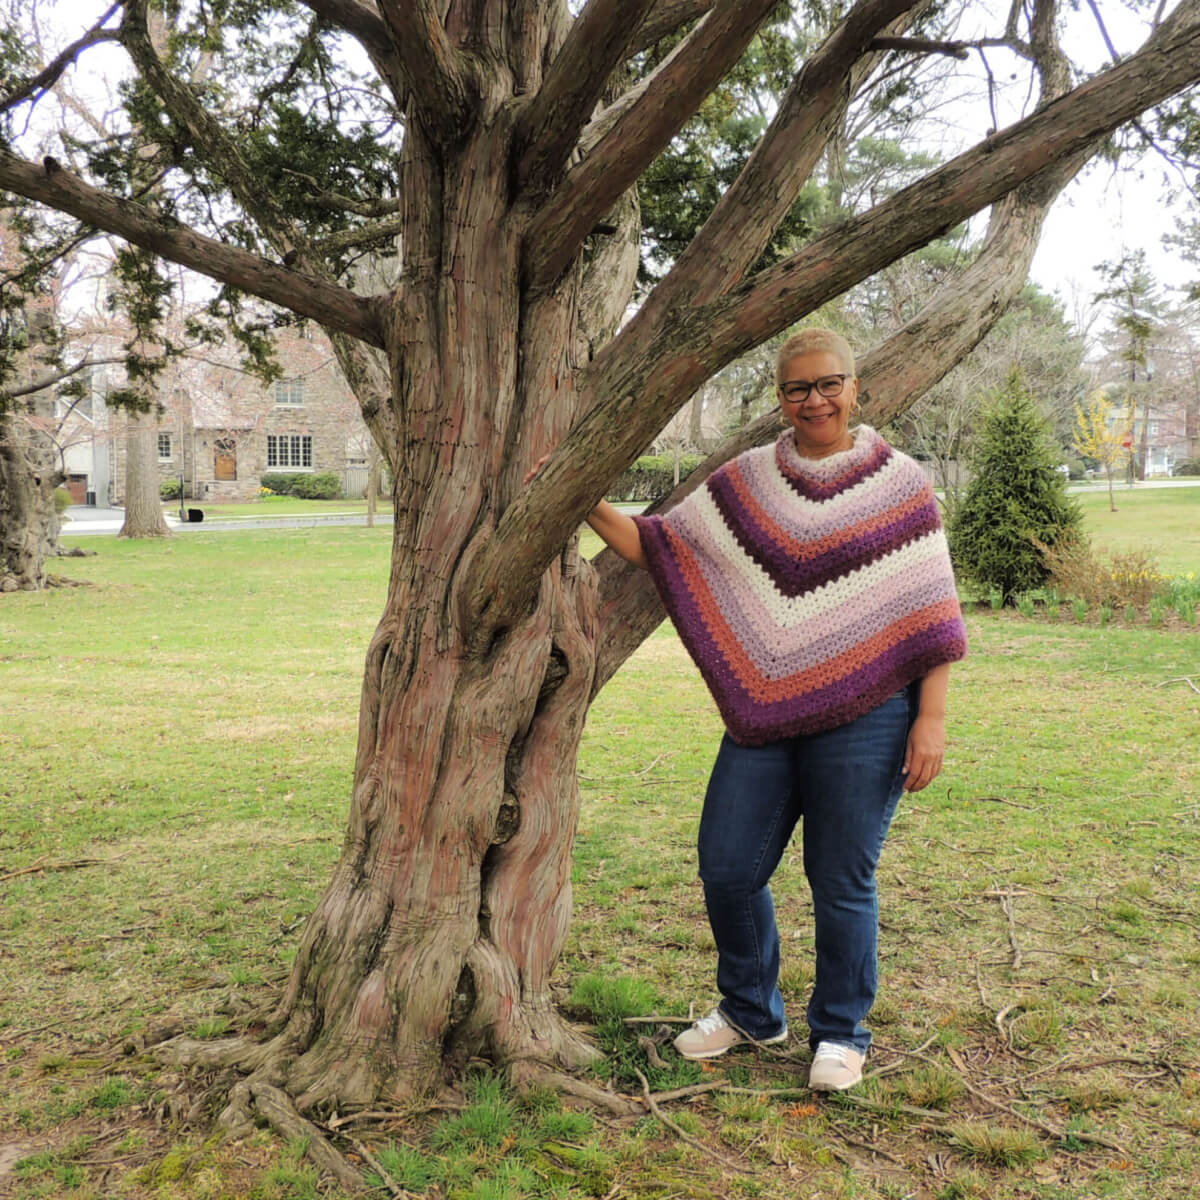 A woman standing next to a tree in a park. She's wearing jeans and a classic 2 point poncho crocheted in fuzzy yarn in stripes from the neck down of cream, lilac, lavender, light rust, purple, and burgundy, repeated so each color is seen 3 times. Her shirt can not be seen beneath the poncho.